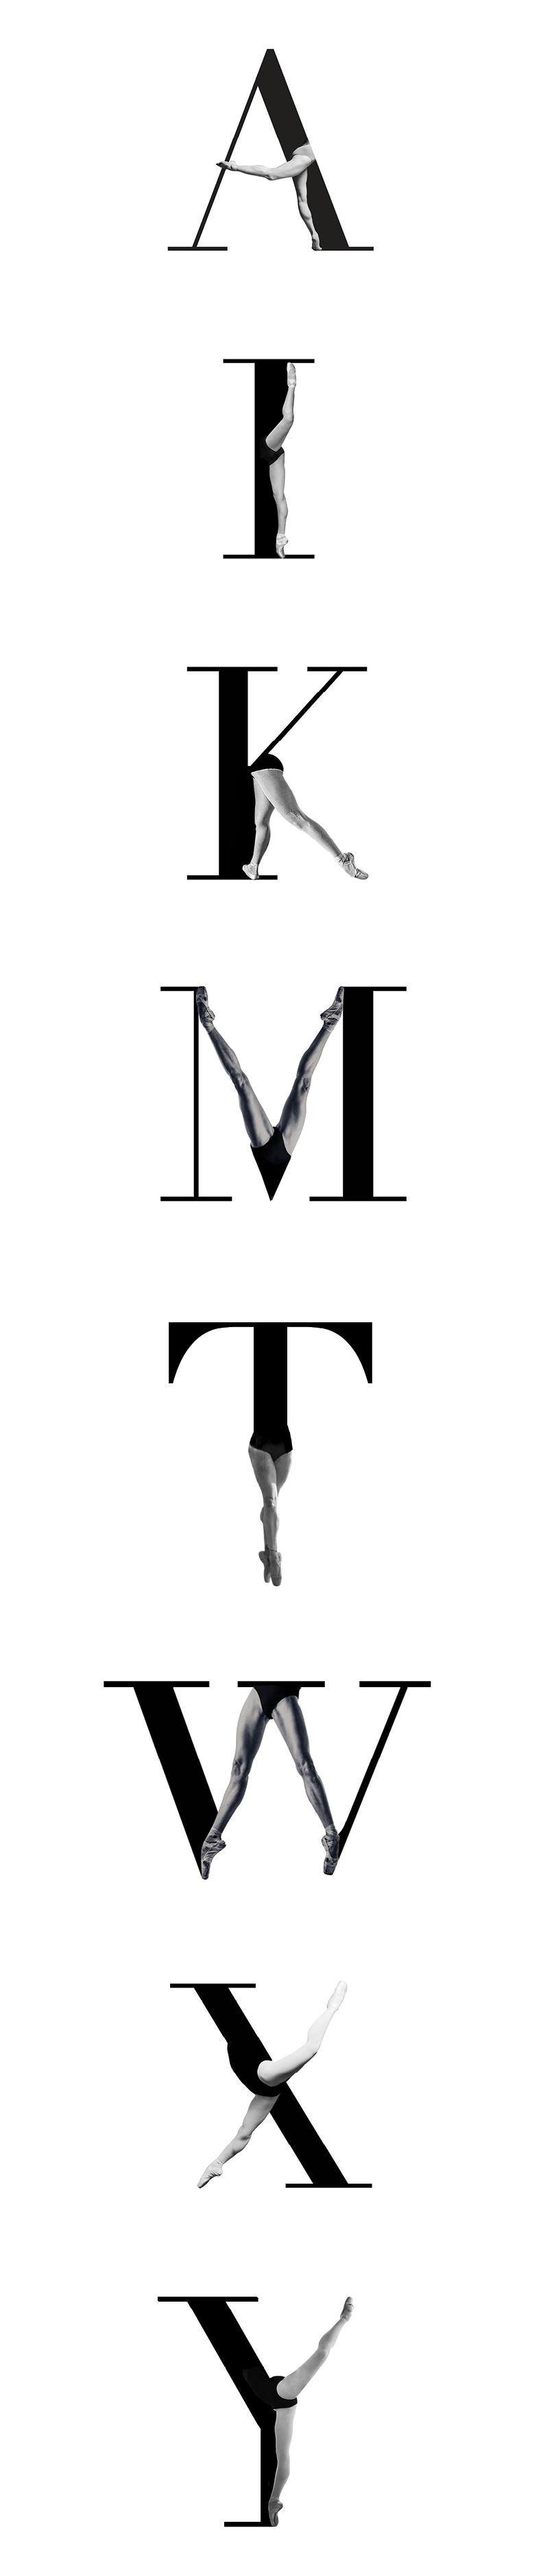 Didot DANCE   elegance Type and Image morph body ballet modern dance Experimental Typography #Ps25Under25